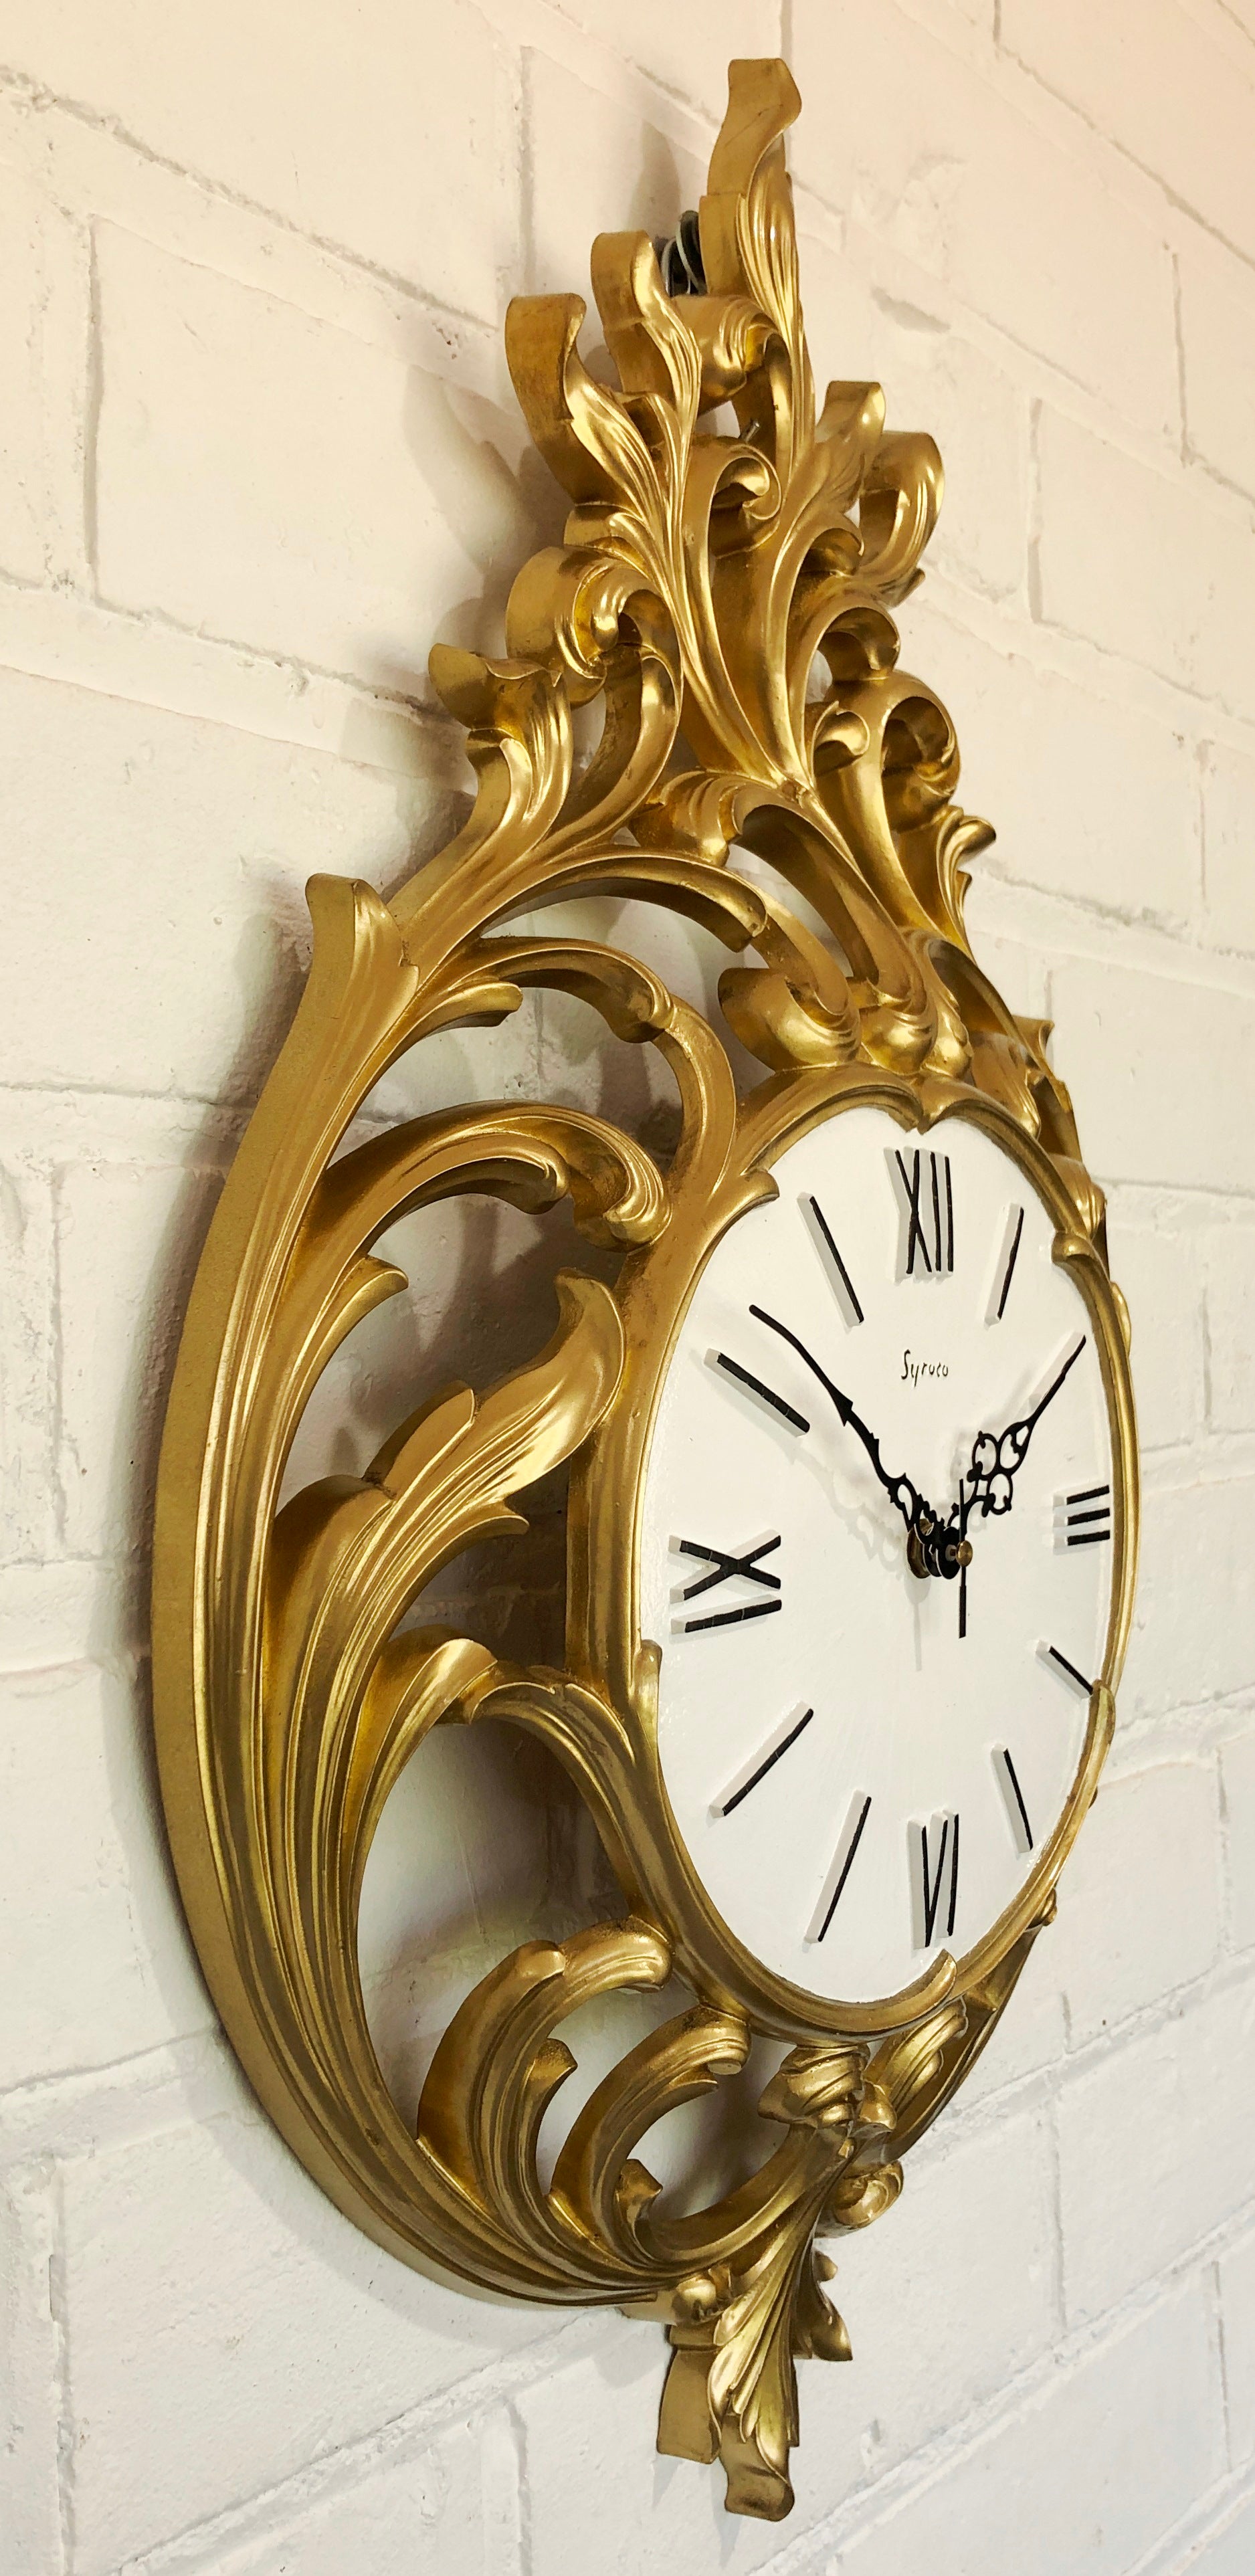 Vintage SYROCO Ornate Starburst Battery Wall Clock | eXibit collection